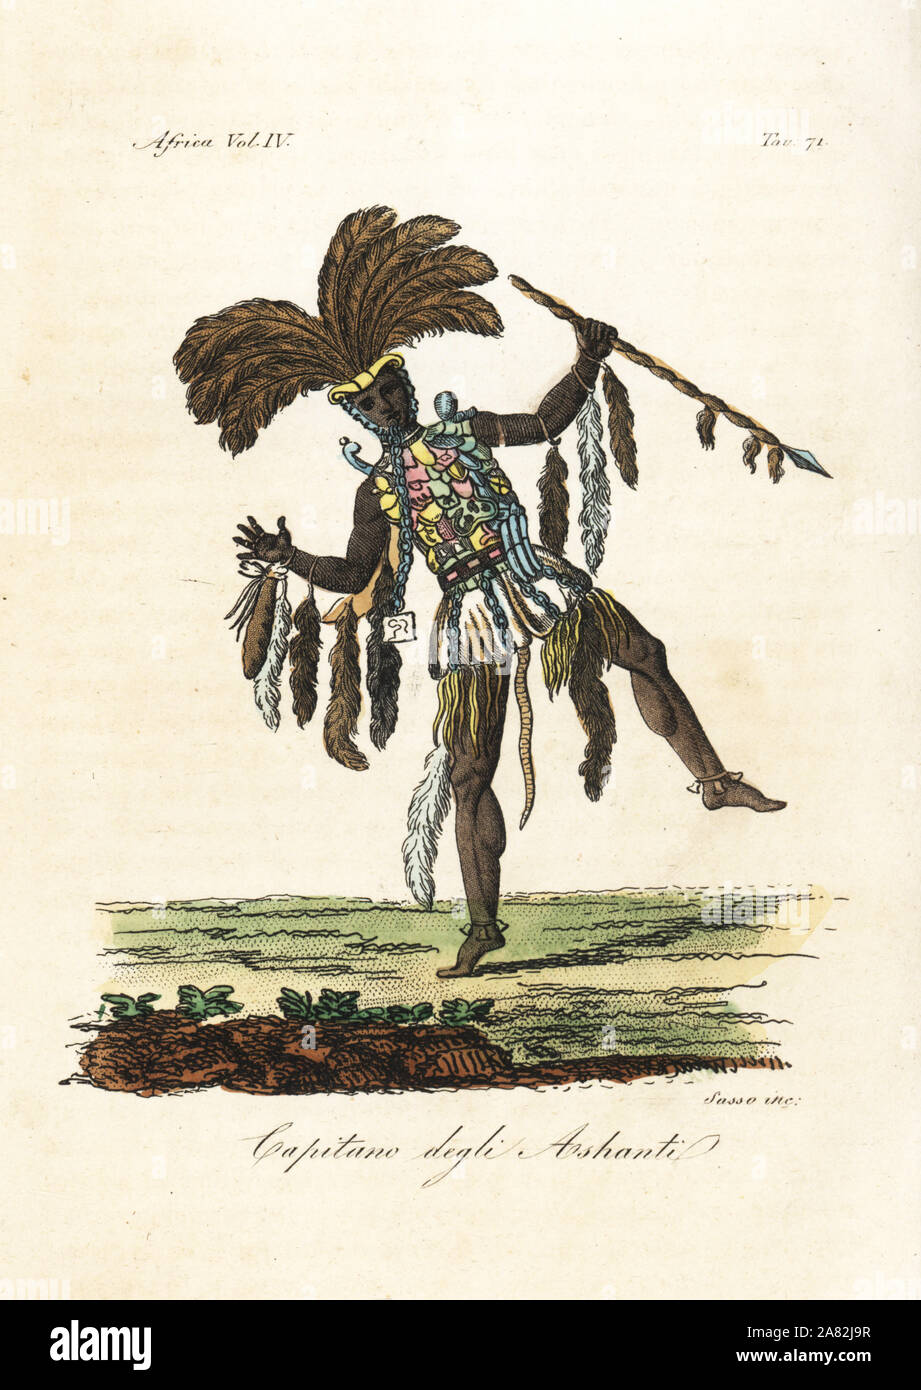 Captain of the Ashanti in war dress of feathers, medals and animal tails, Ghana. From Thomas Bowdich's account of his travels to the Kingdom of Ashanti, 1817. Handcoloured copperplate engraving by Antonio Sasso from Giulio Ferrario's Ancient and Modern Costumes of all the Peoples of the World, Florence, Italy, 1843. Stock Photo